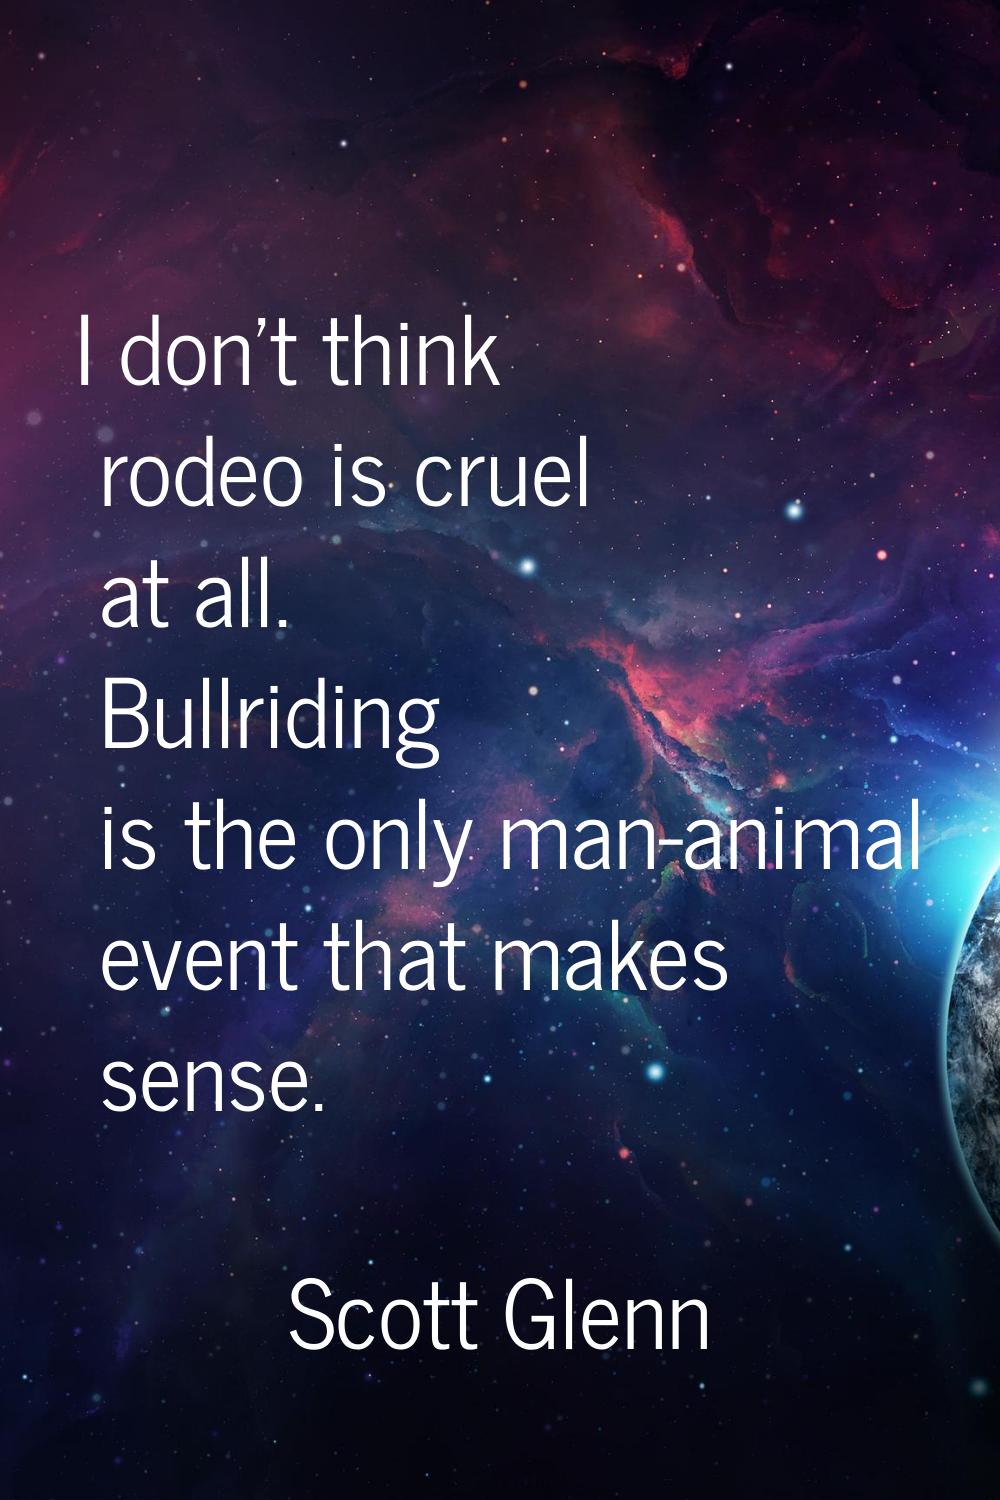 I don't think rodeo is cruel at all. Bullriding is the only man-animal event that makes sense.